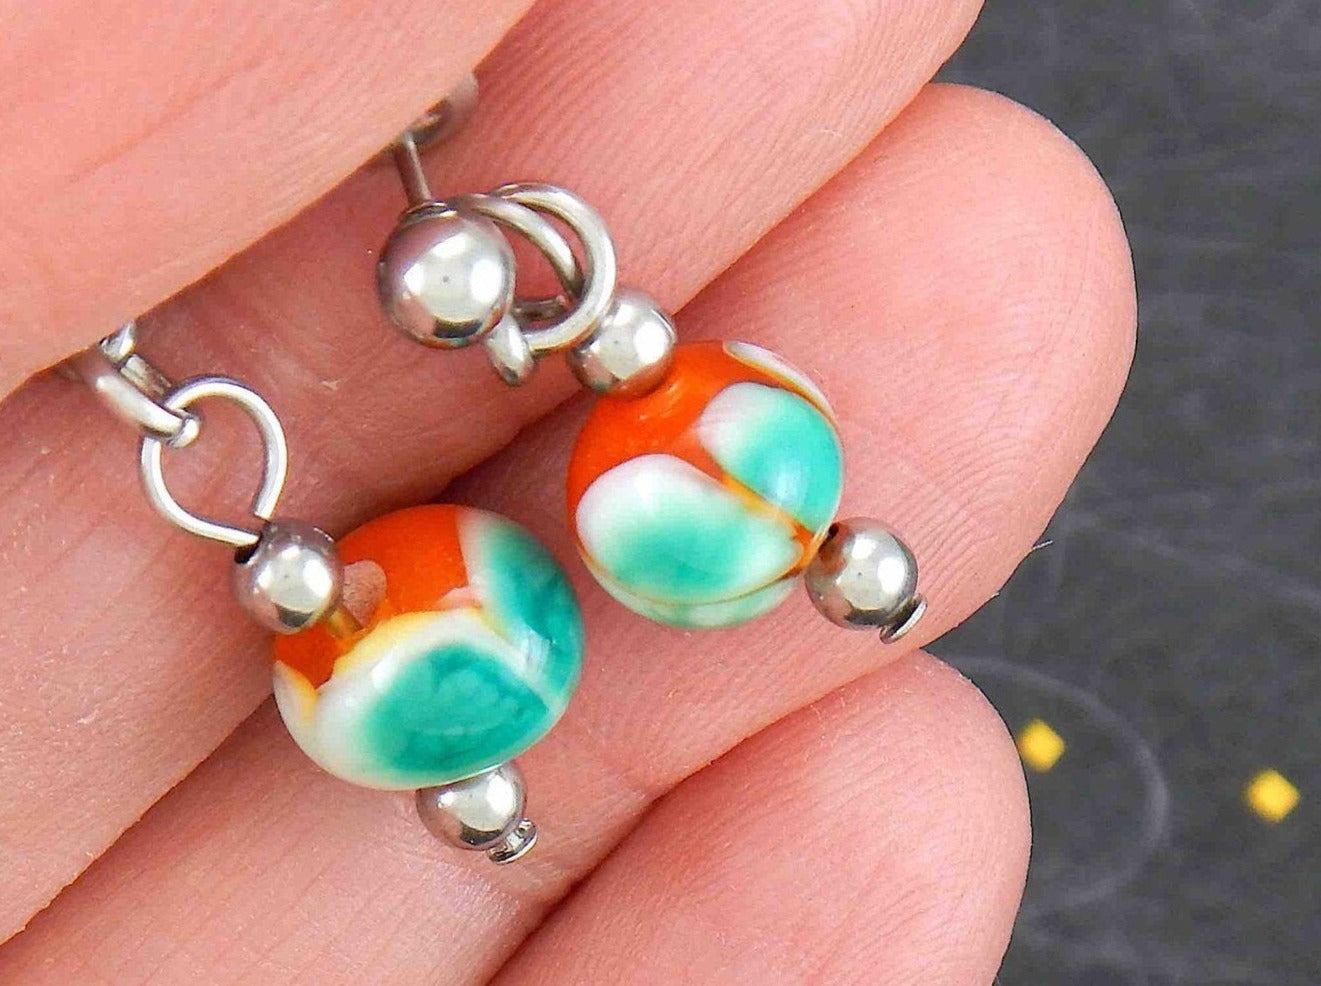 Short earrings with burnt orange glass balls, white and green dots (Murano-style glass handmade in Montreal), stainless steel posts